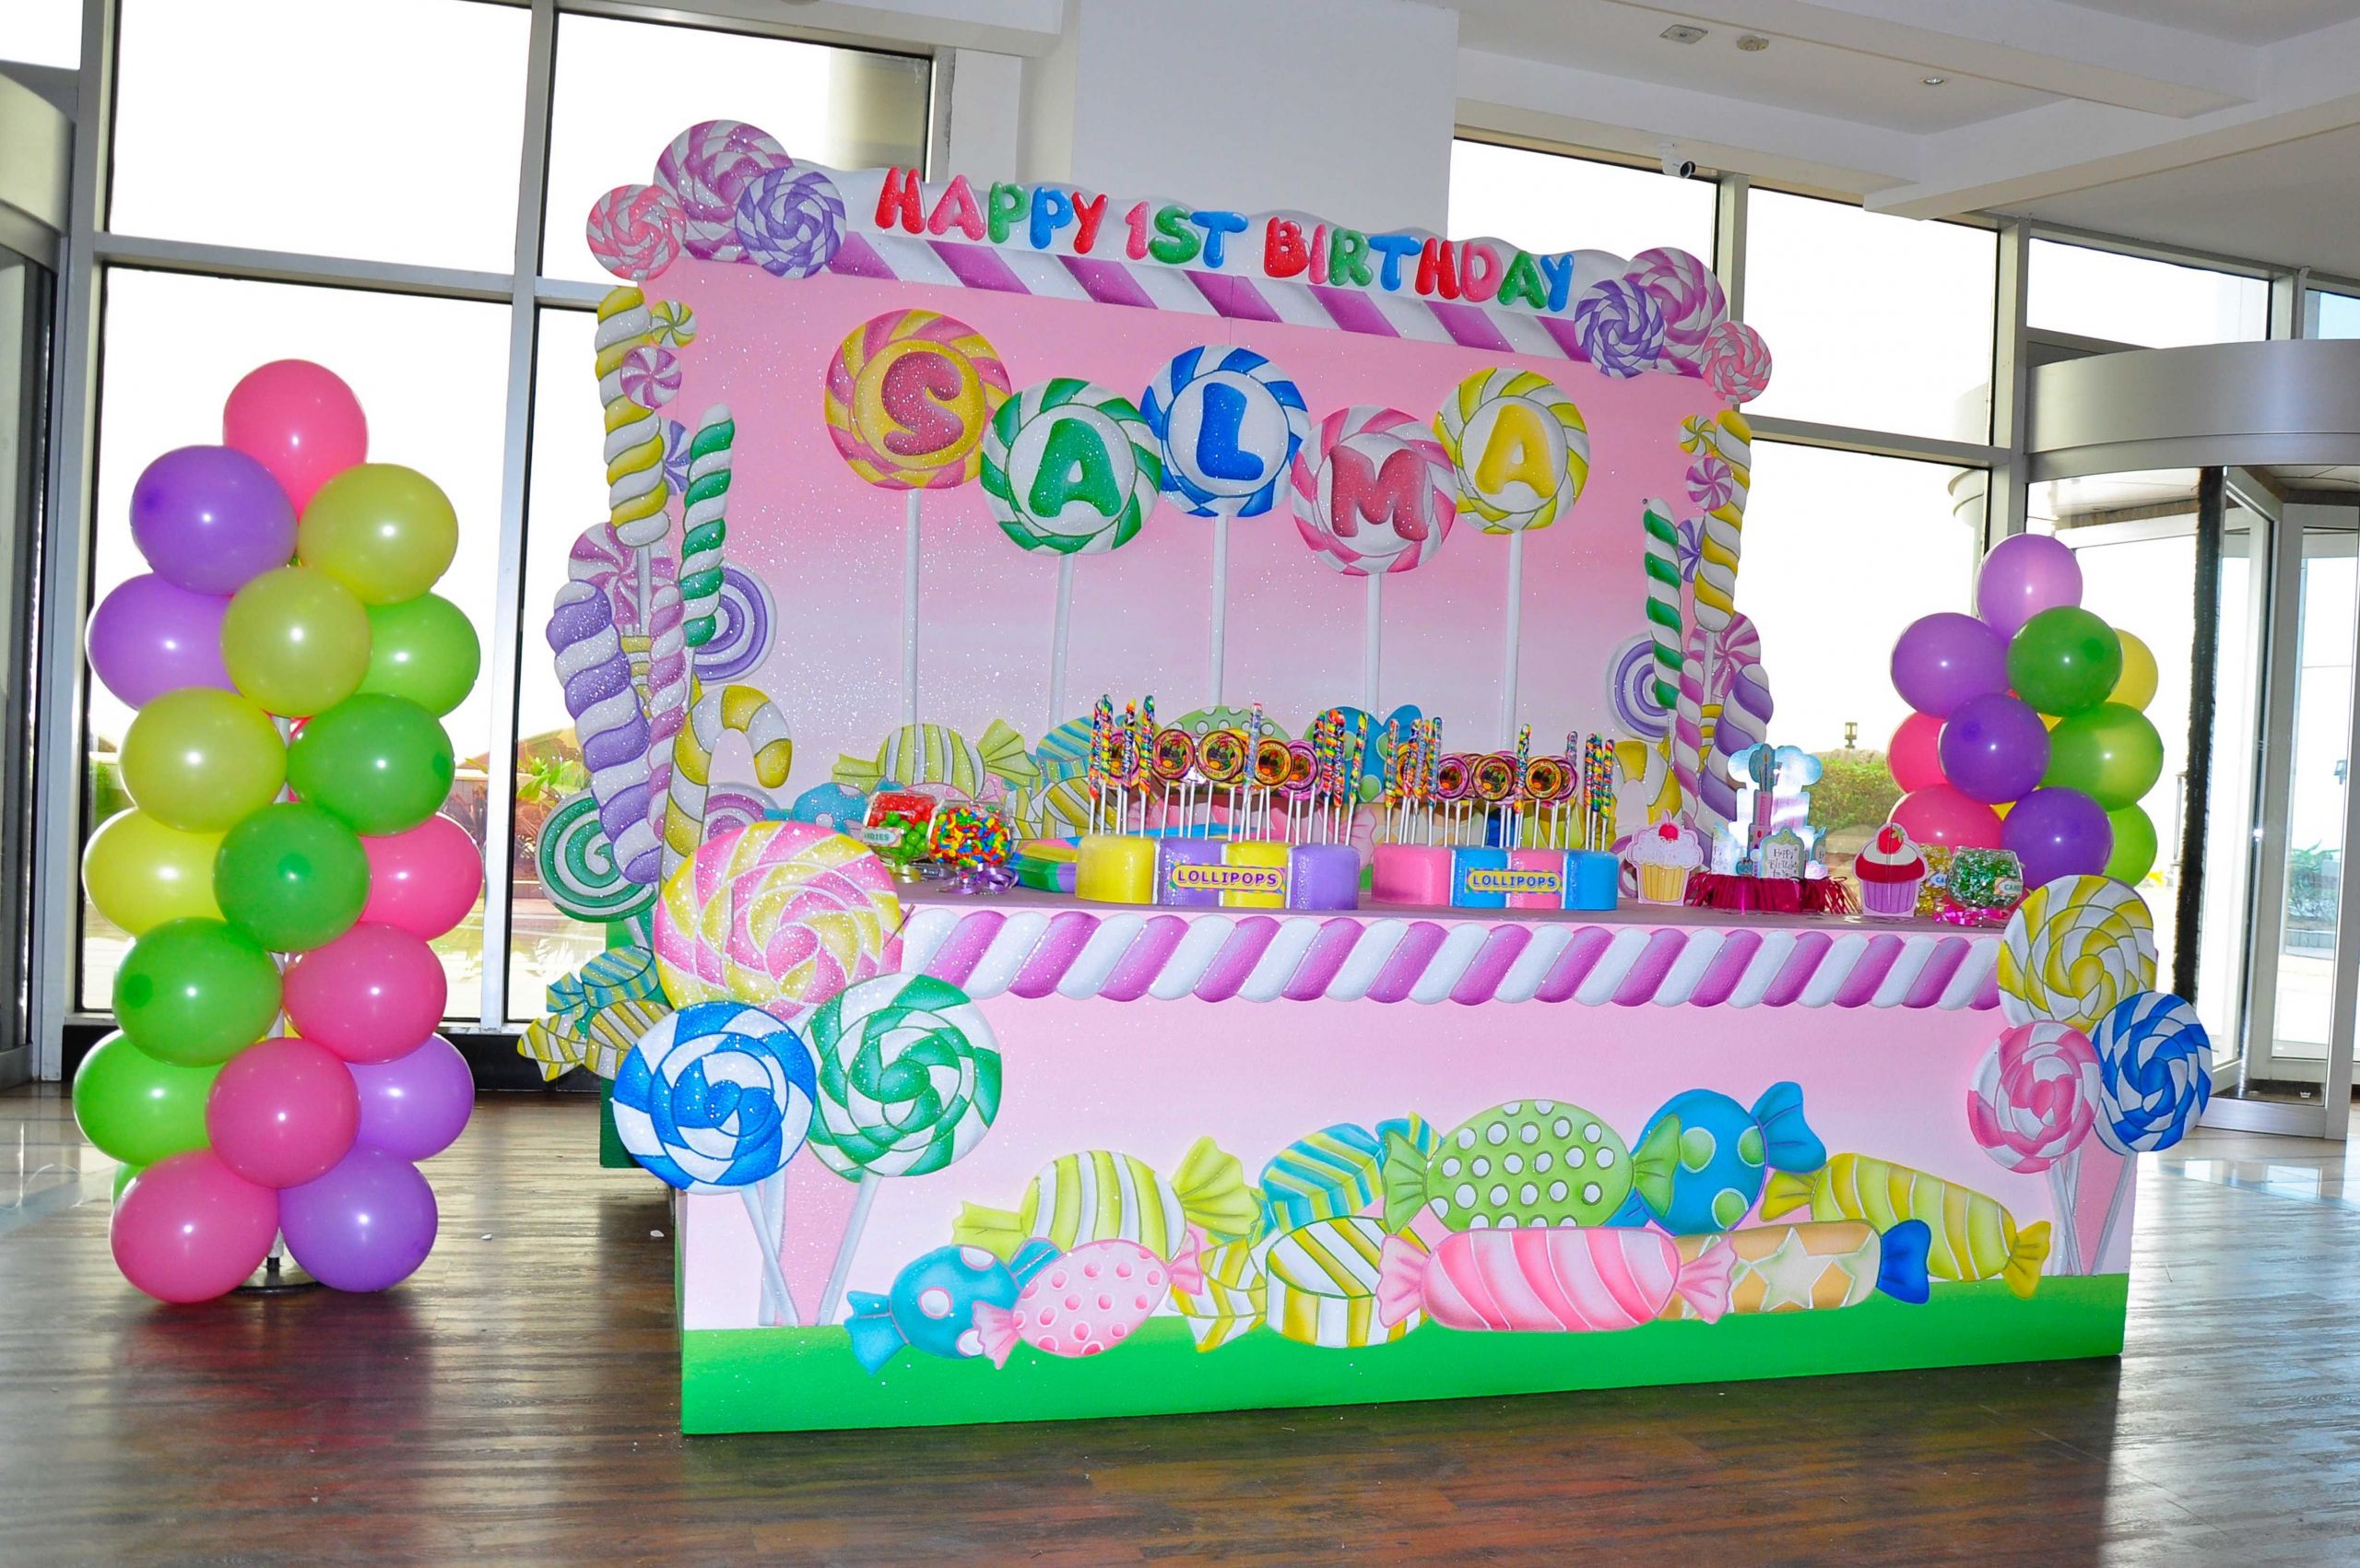 Candyland Birthday Party Decorations
 Candyland party decoration by fantasyparty in 2019